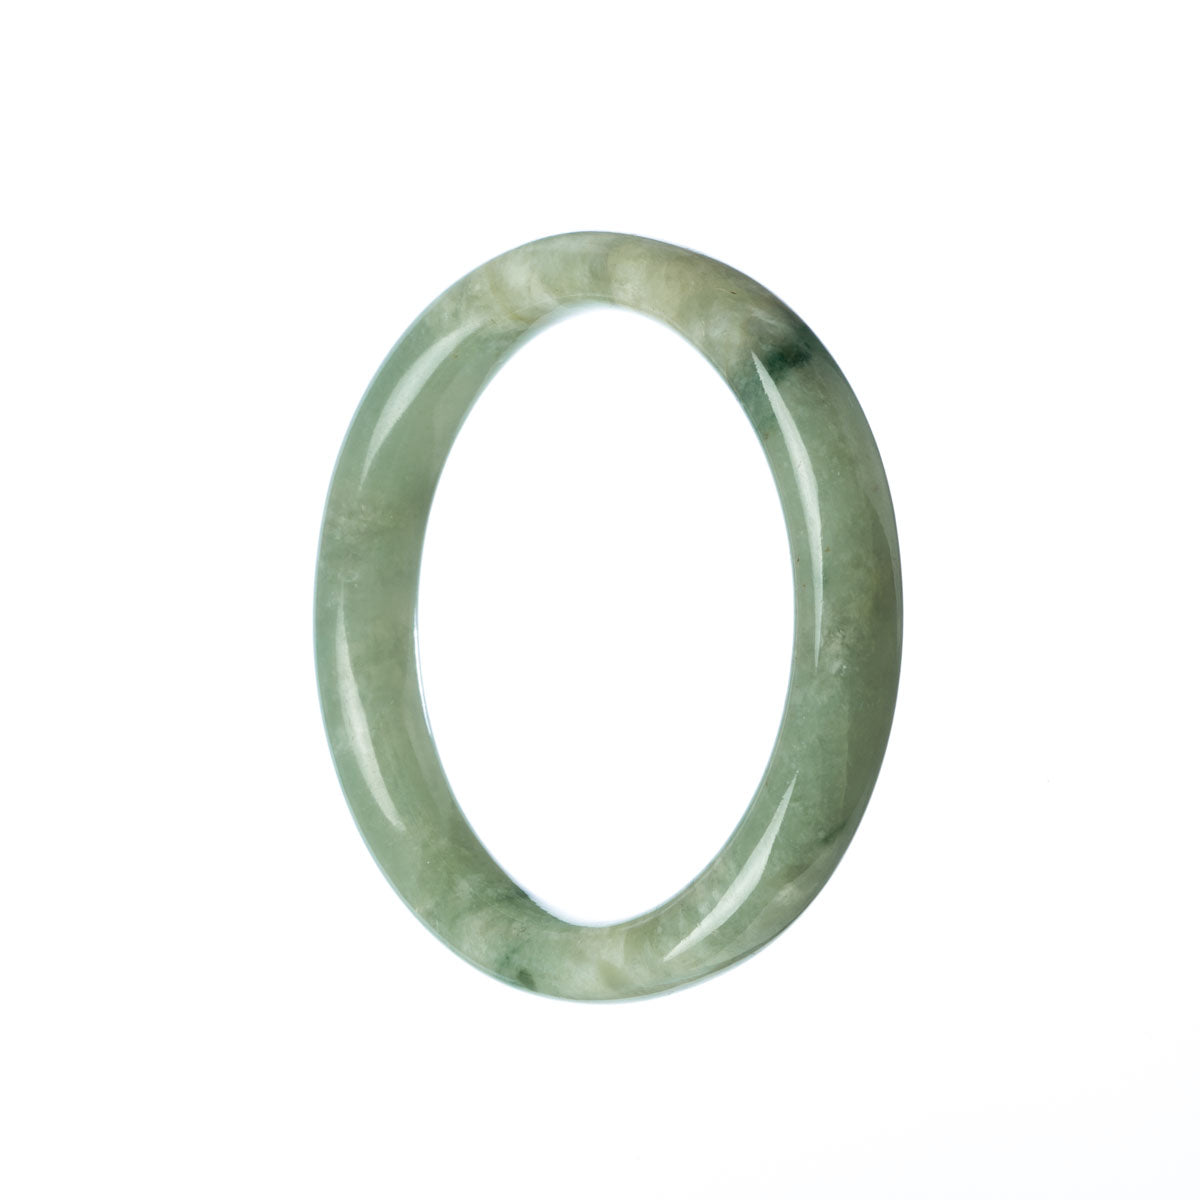 A beautiful green Burmese jade bangle bracelet with a certified Grade A quality. The bracelet has a semi-round shape and measures 54mm in diameter. Manufactured by MAYS GEMS.